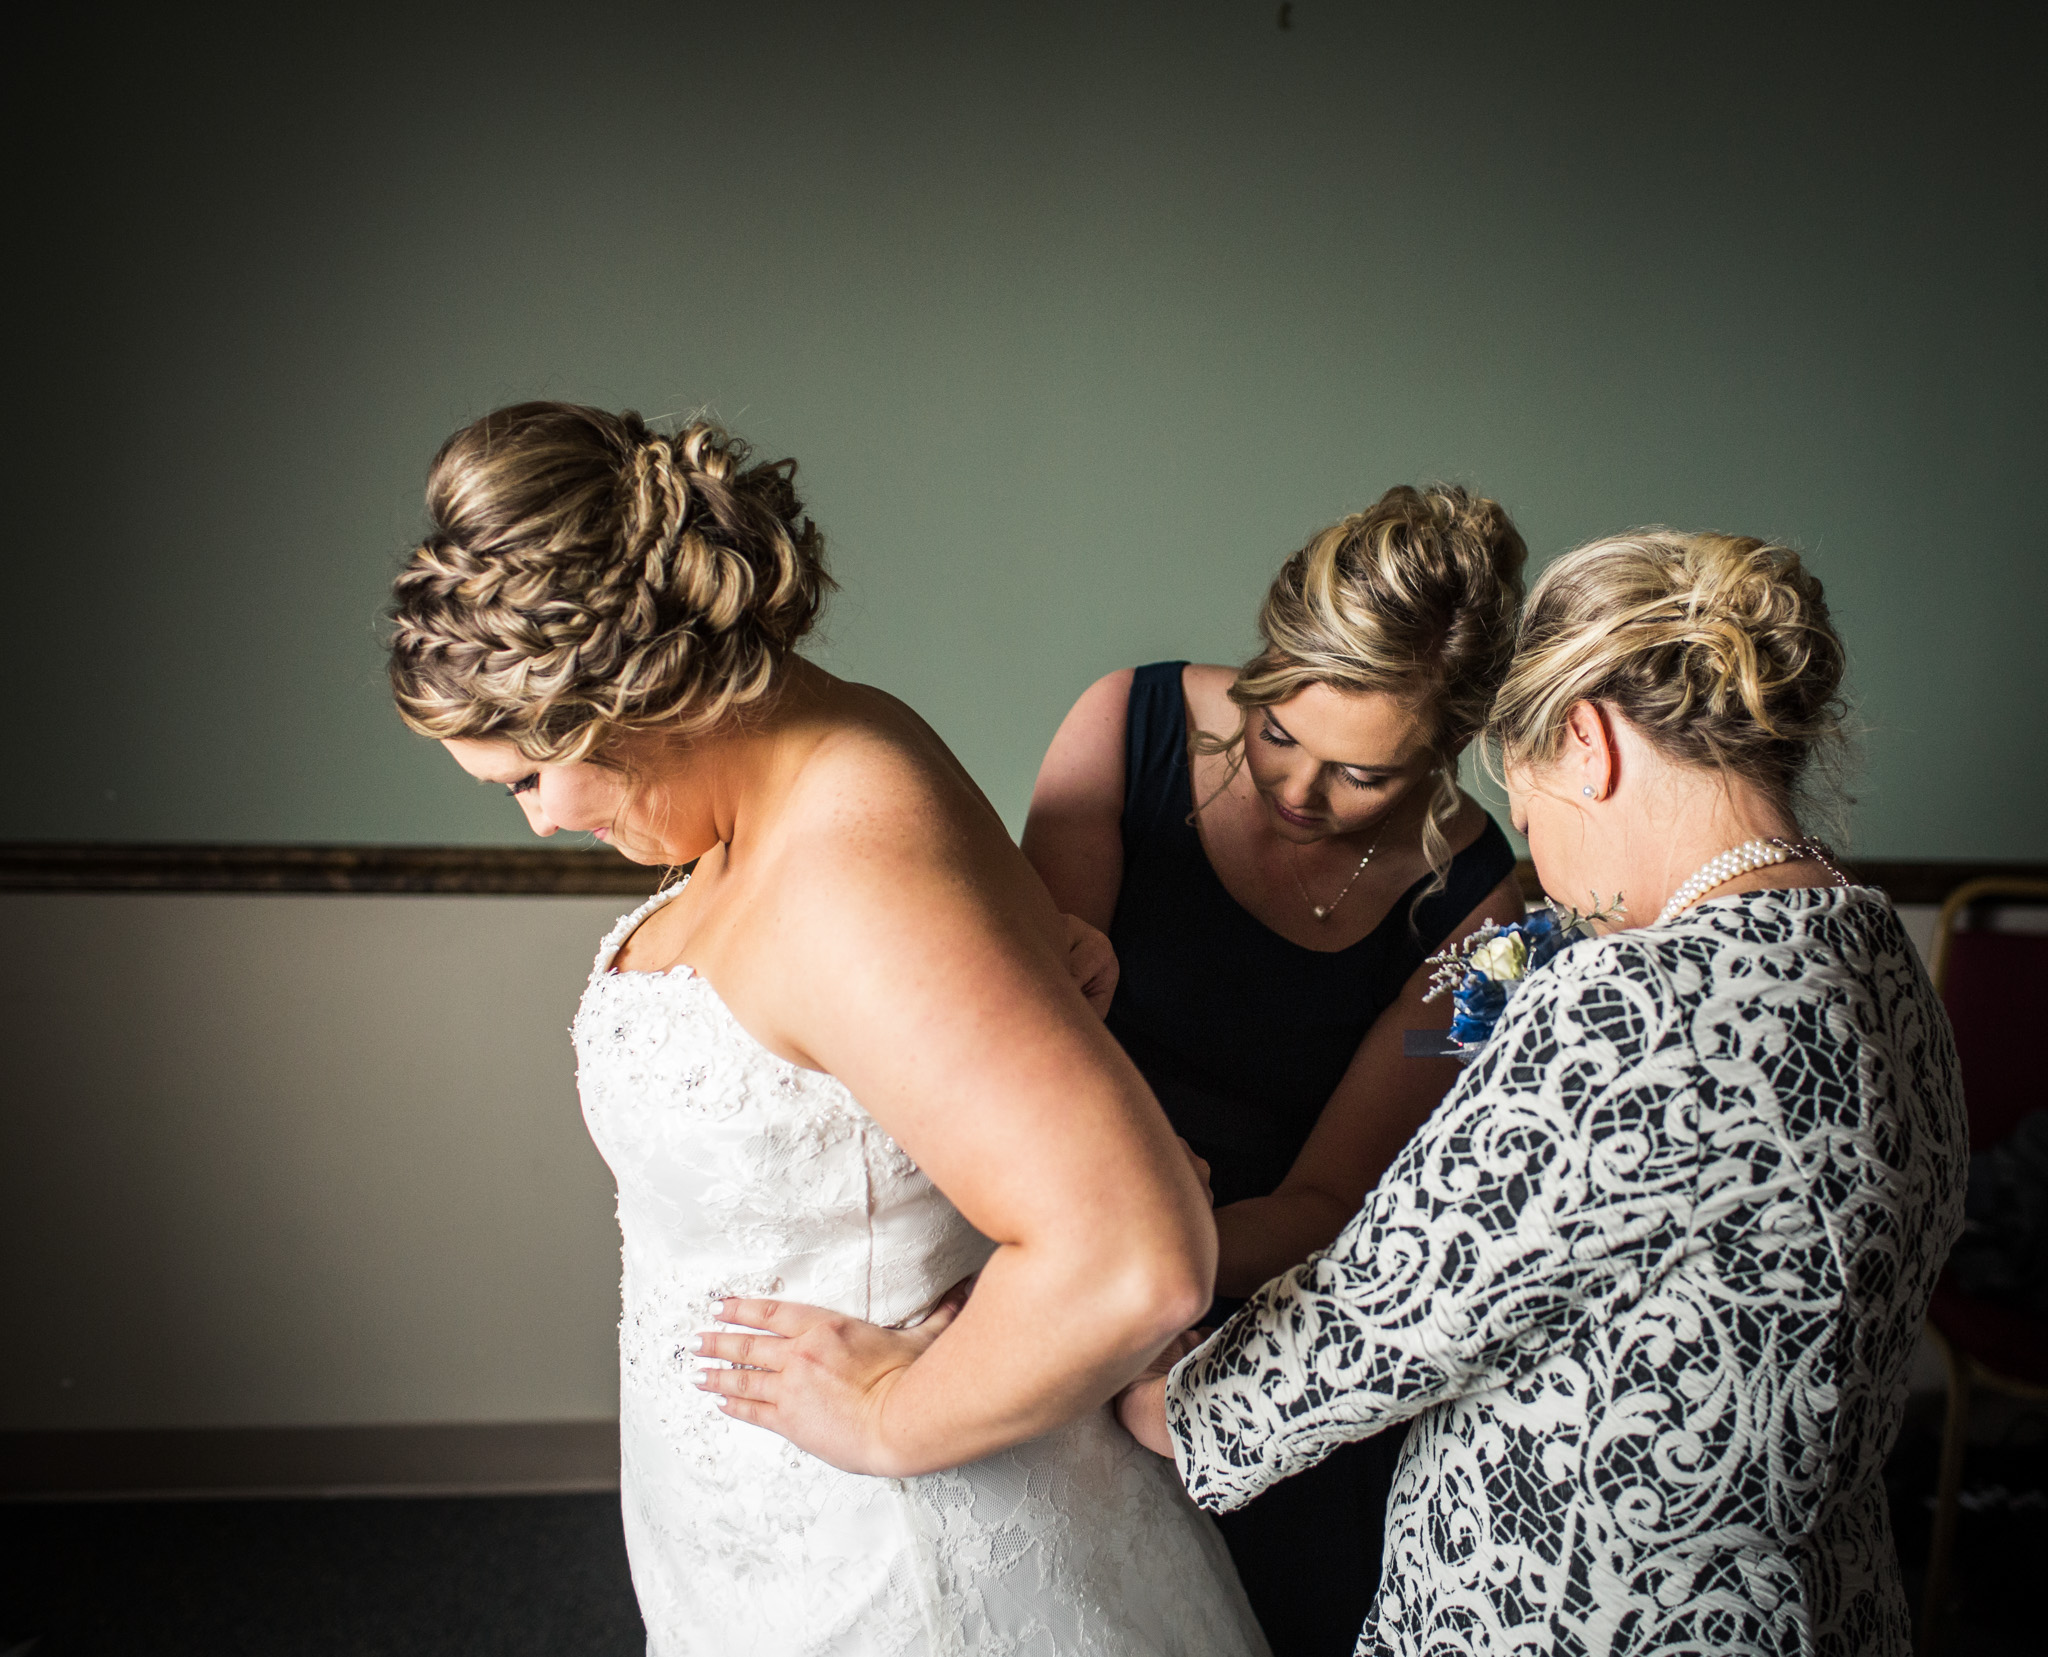 Zibell Spring Wedding, Bride and Groom, Powerful, Connected, Exploration, Laura Duggleby Photography -55.JPG